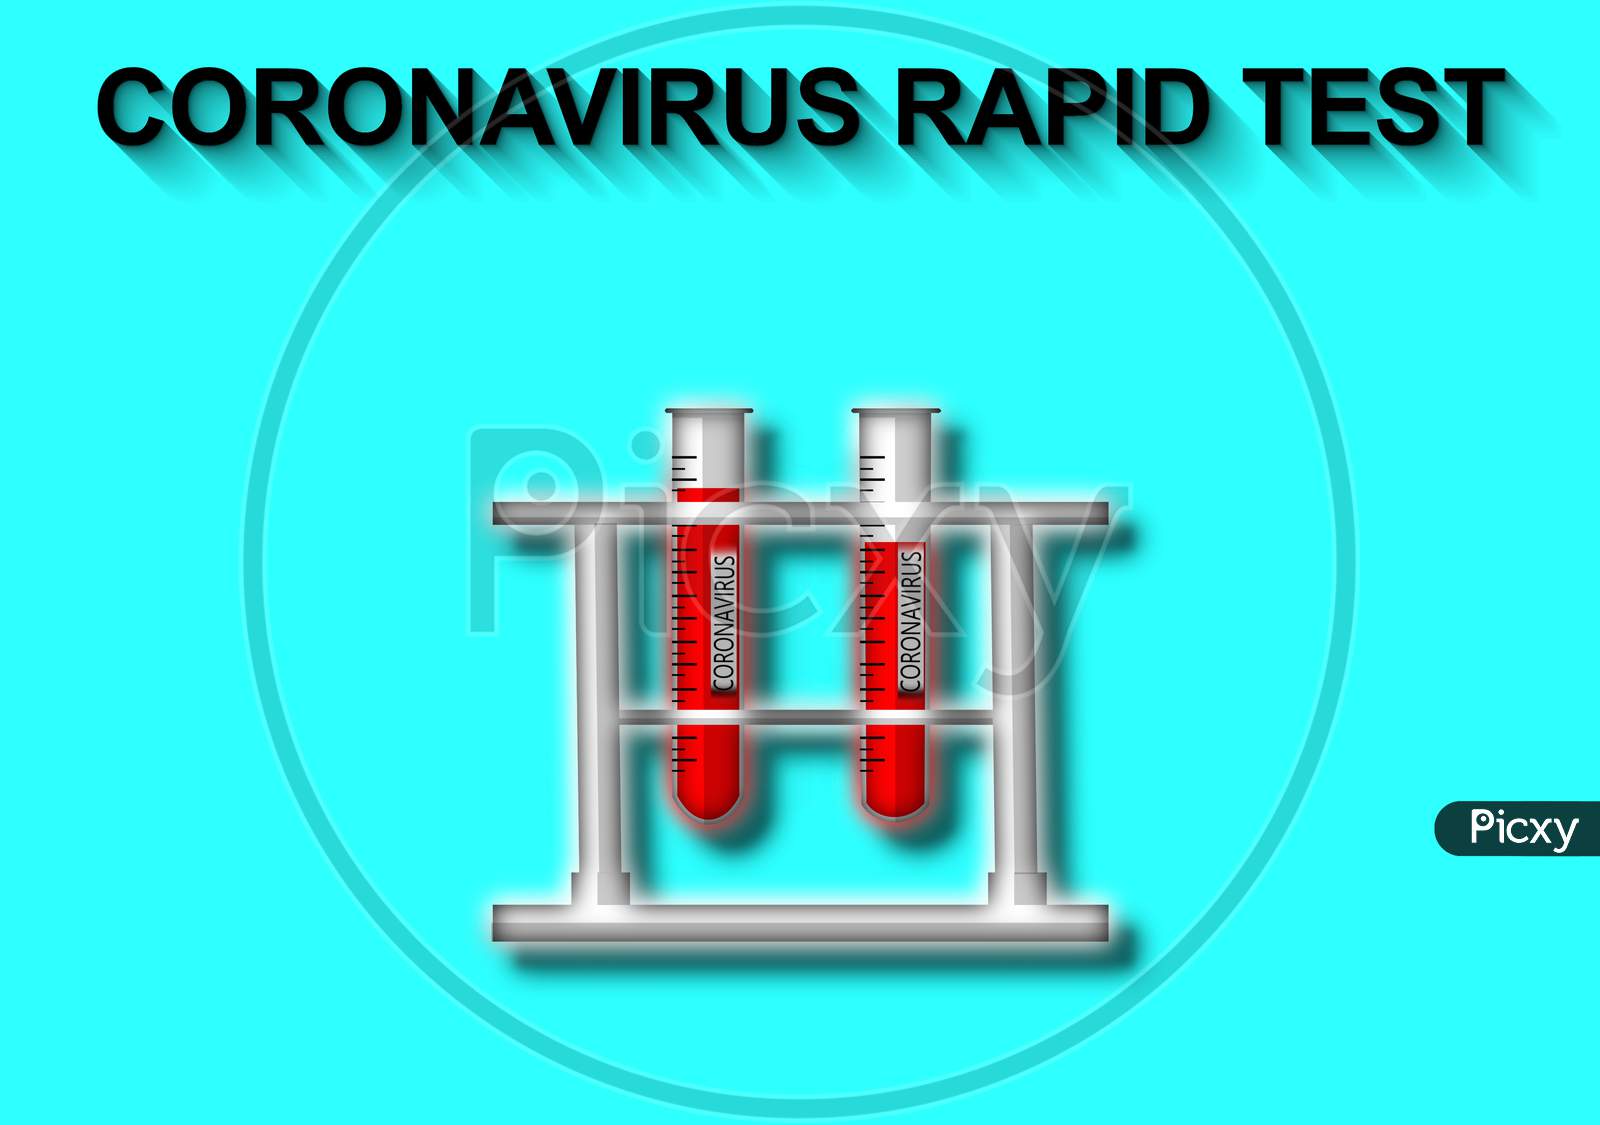 3D Illustration Graphic Of Set Of Glass Tube Test With Blood Sample And The Text 'Coronavirus Rapid Test' Isolated On Blue Background. Blood Sample Icon.